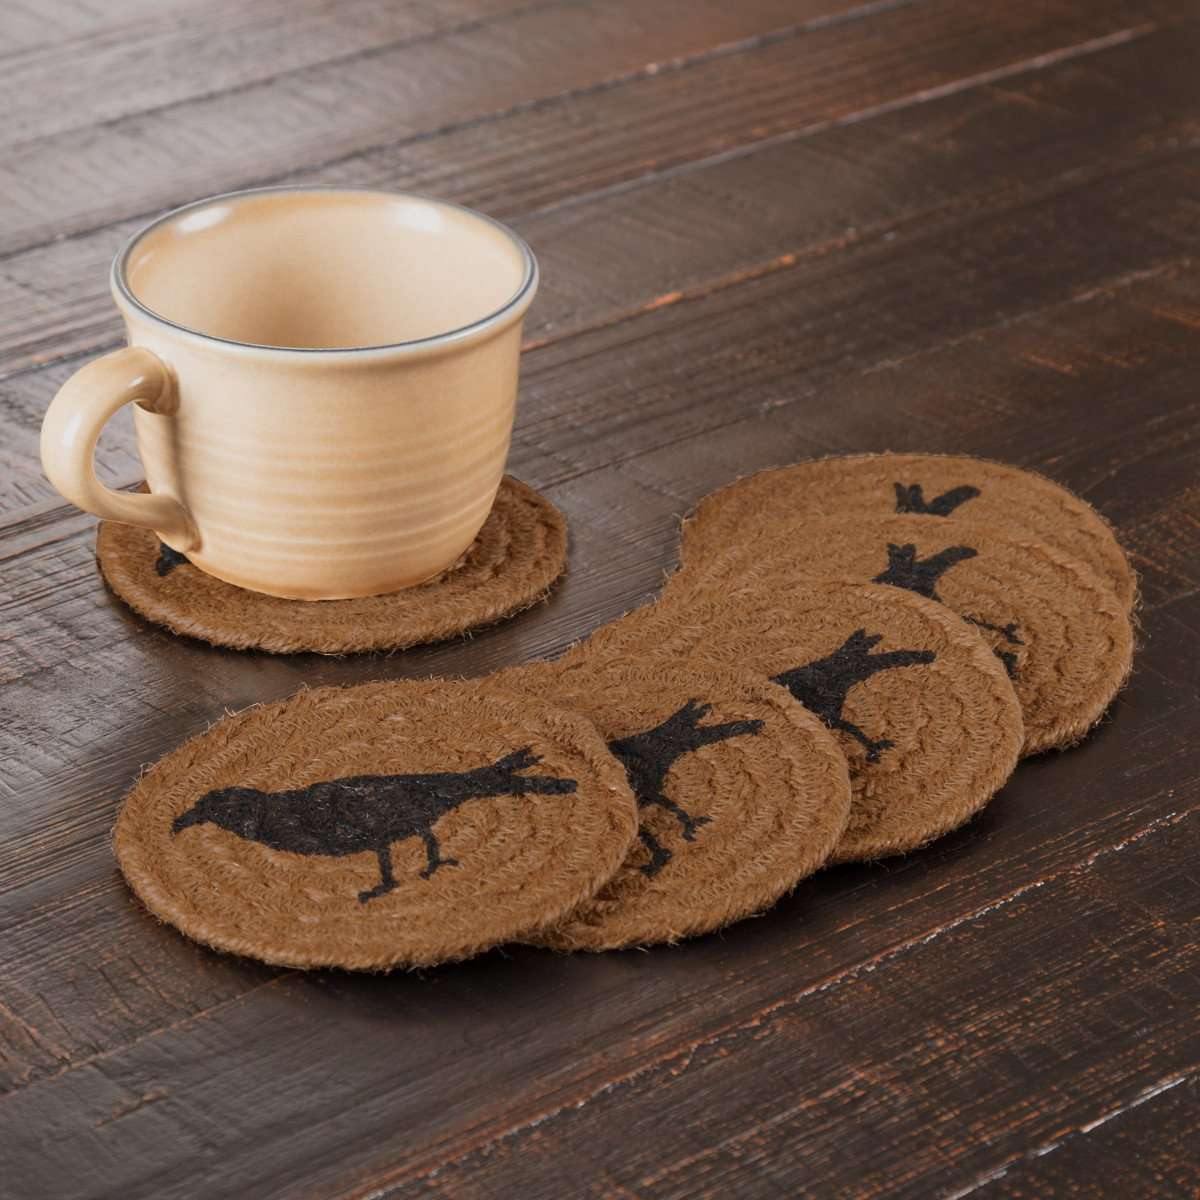 Heritage Farms Crow Jute Coaster Set of 6 VHC Brands